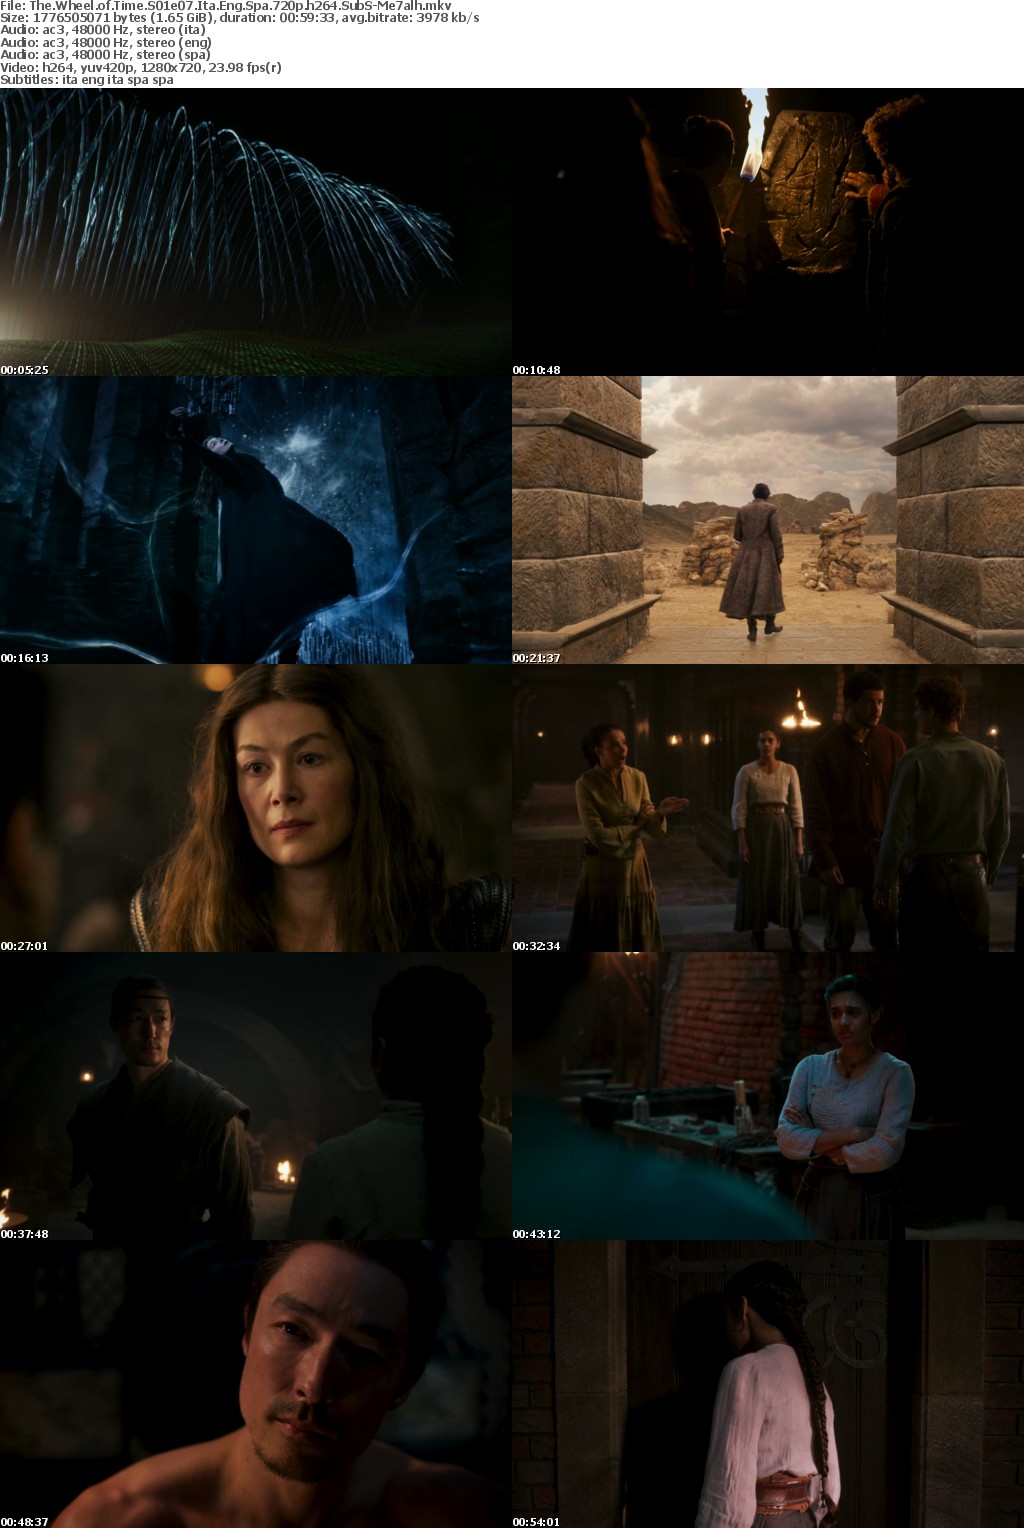 The Wheel of Time S01e07 720p Ita Eng Spa SubS MirCrewRelease byMe7alh